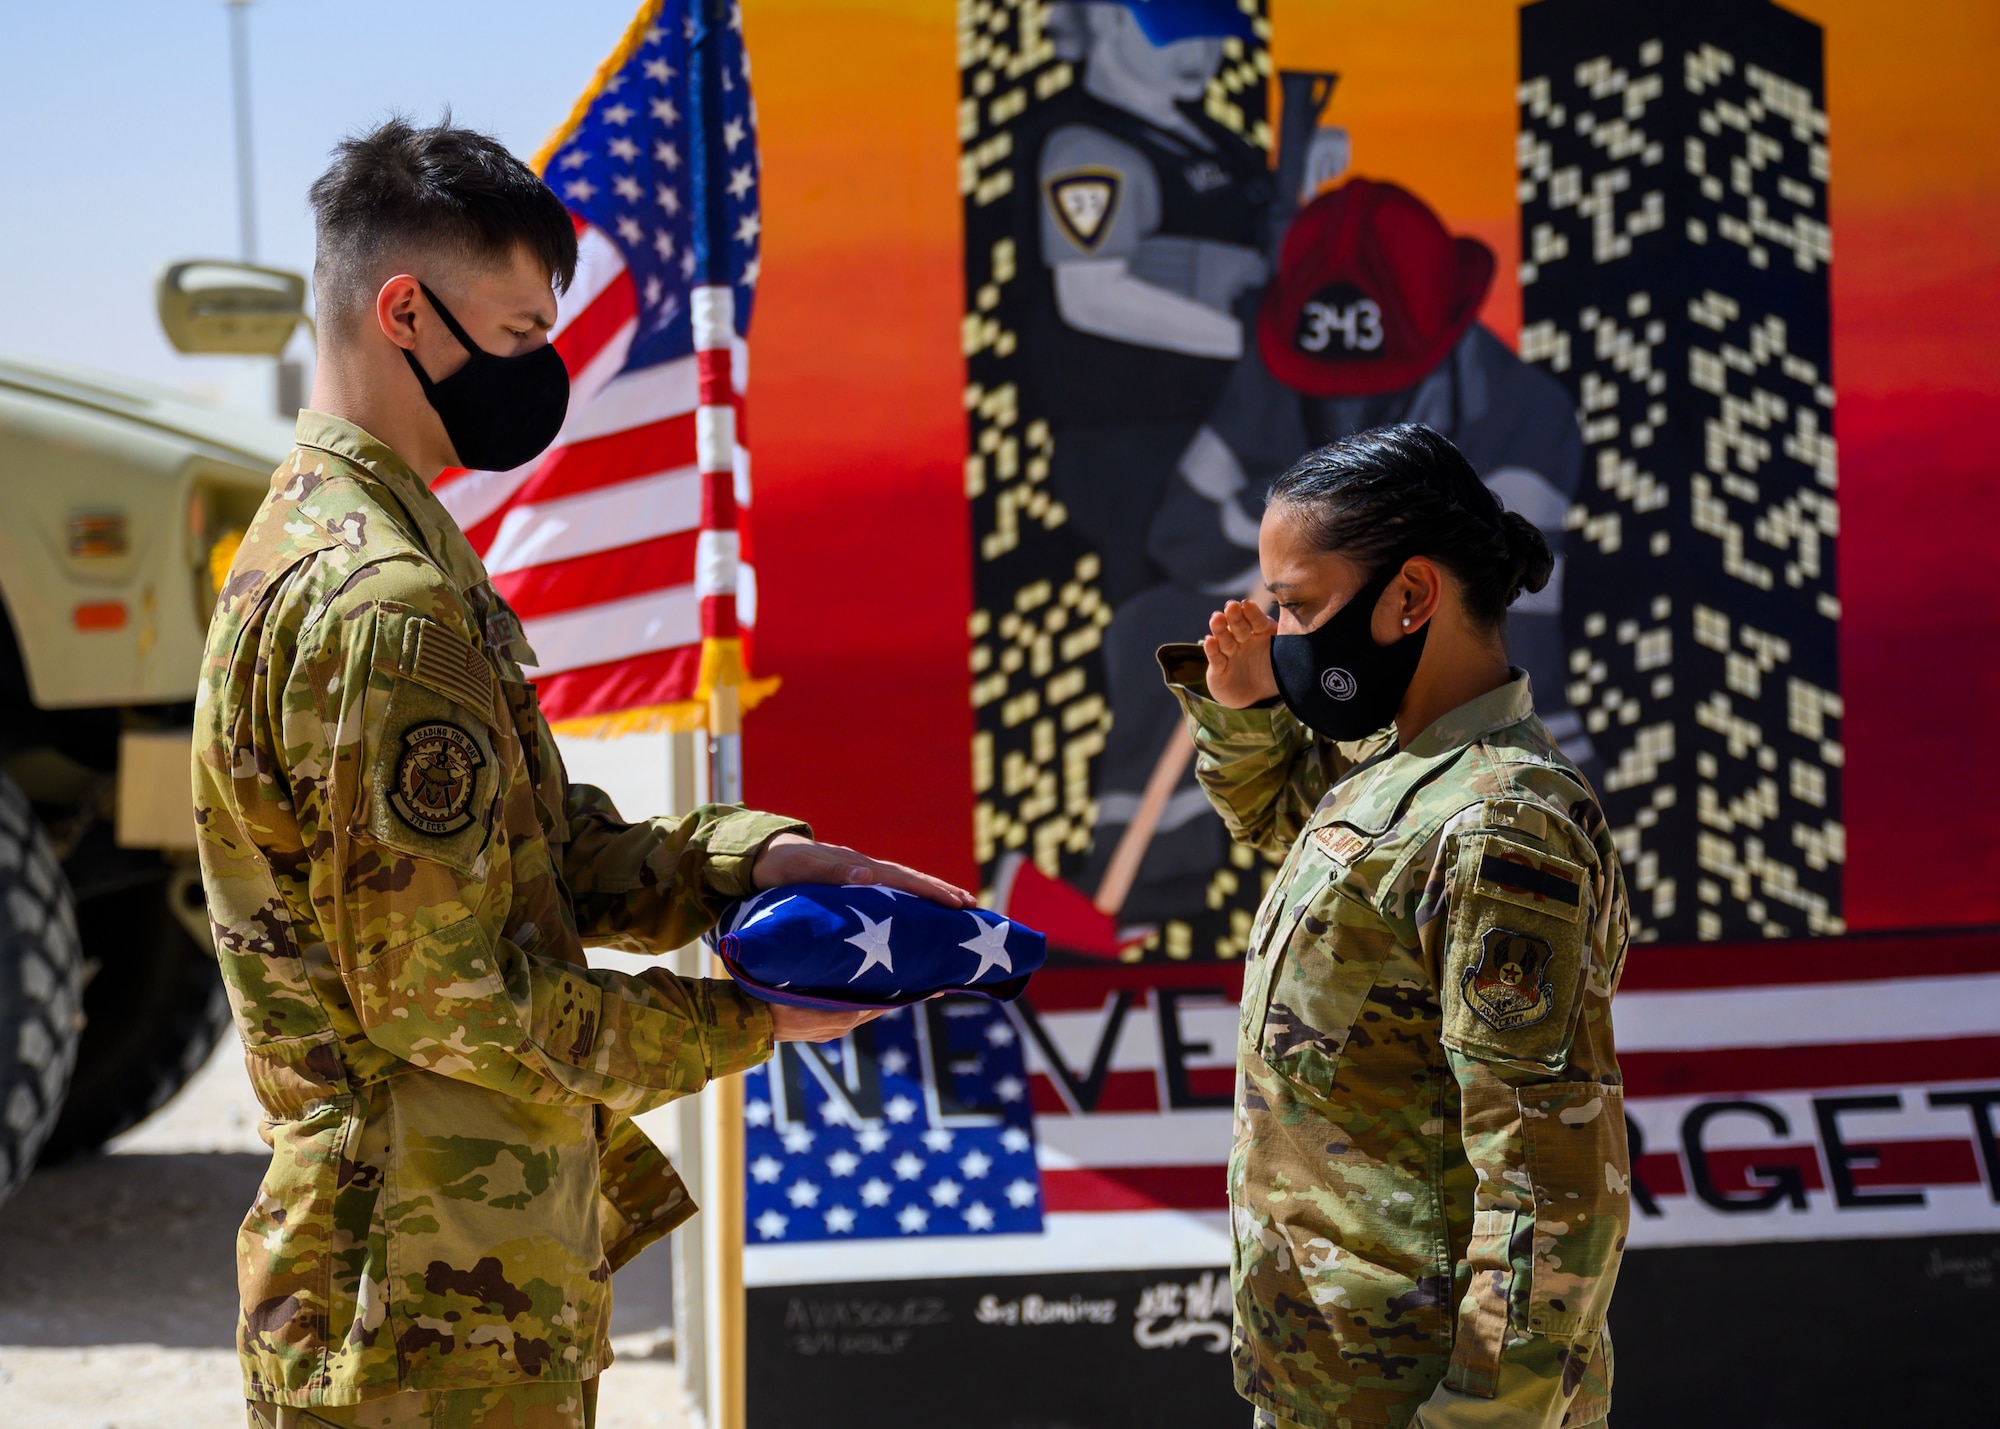 Staff Sgt. Aubrey Houston, 378th Expeditionary Security Forces Squadron defender, salutes the flag as it is held by Airman 1st Class Timothy Treat-Mass, 378th Expeditionary Civil Engineer Squadron firefighter, during a Remembrance Ceremony Sept. 11, 2021, at Prince Sultan Air Base, Kingdom of Saudi Arabia.